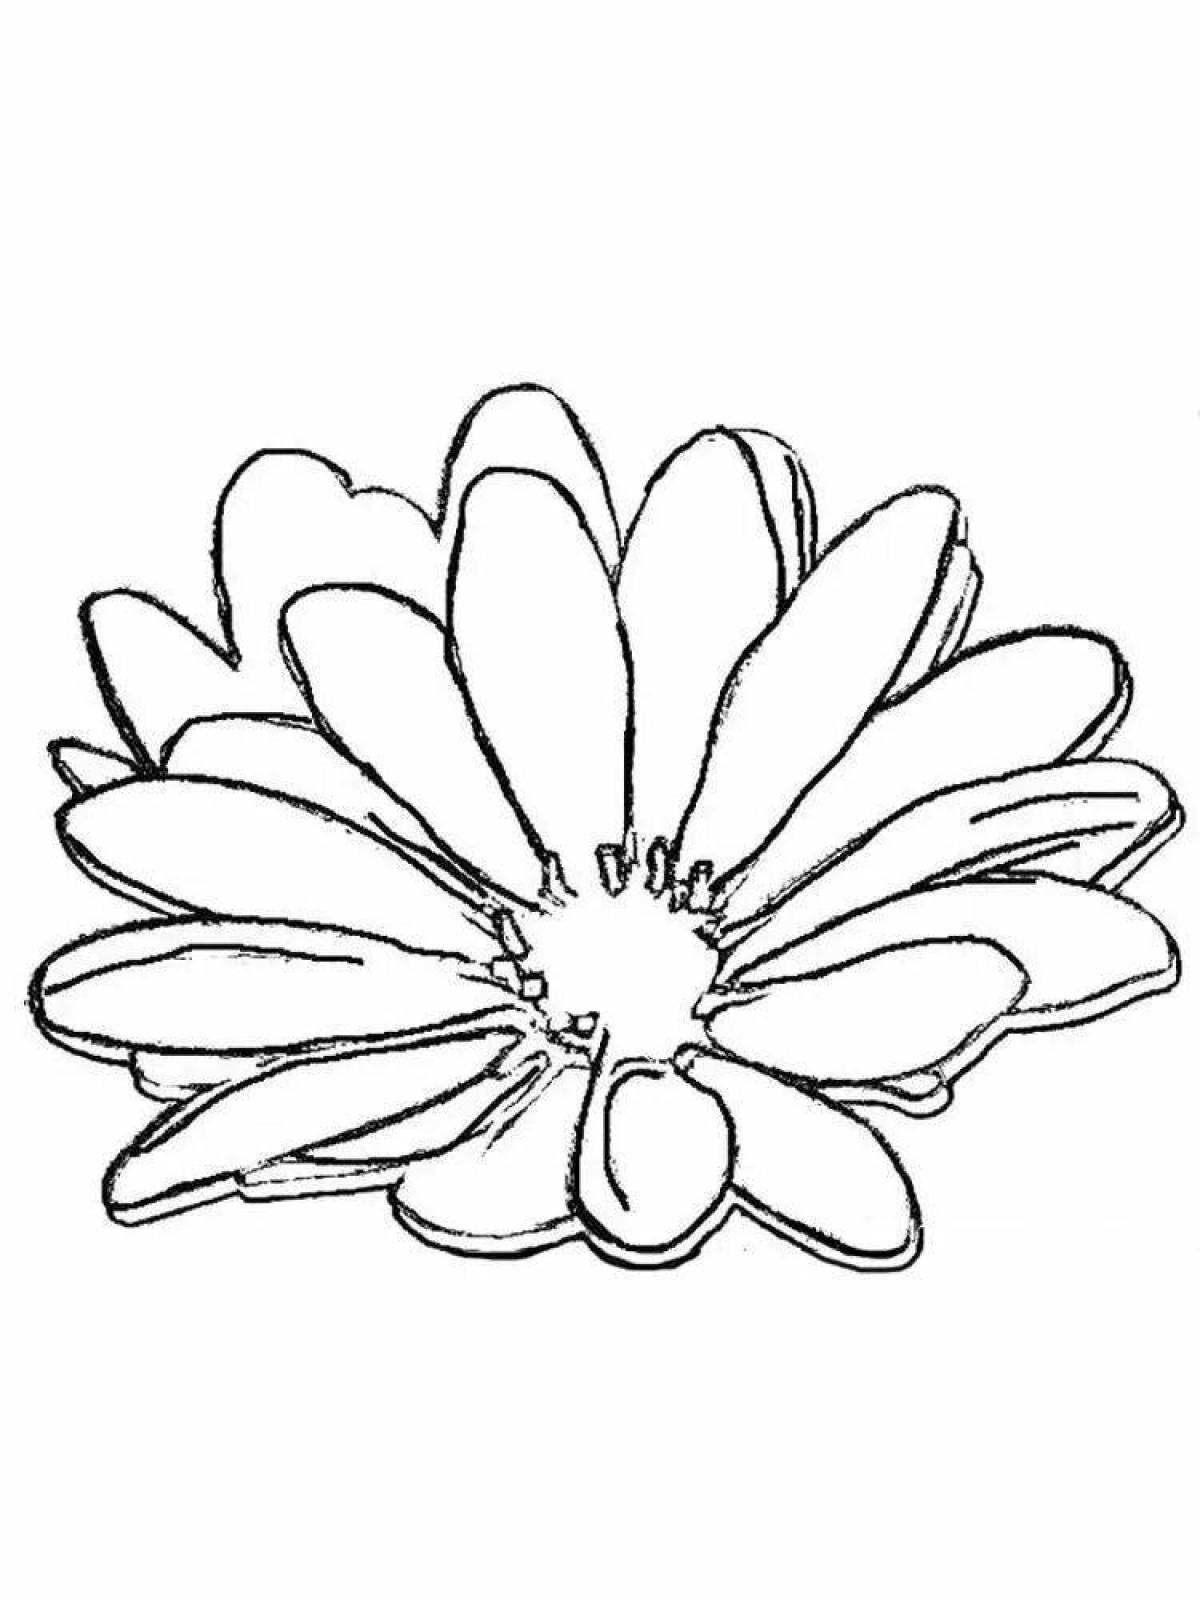 Coloring page gorgeous chamomile flower